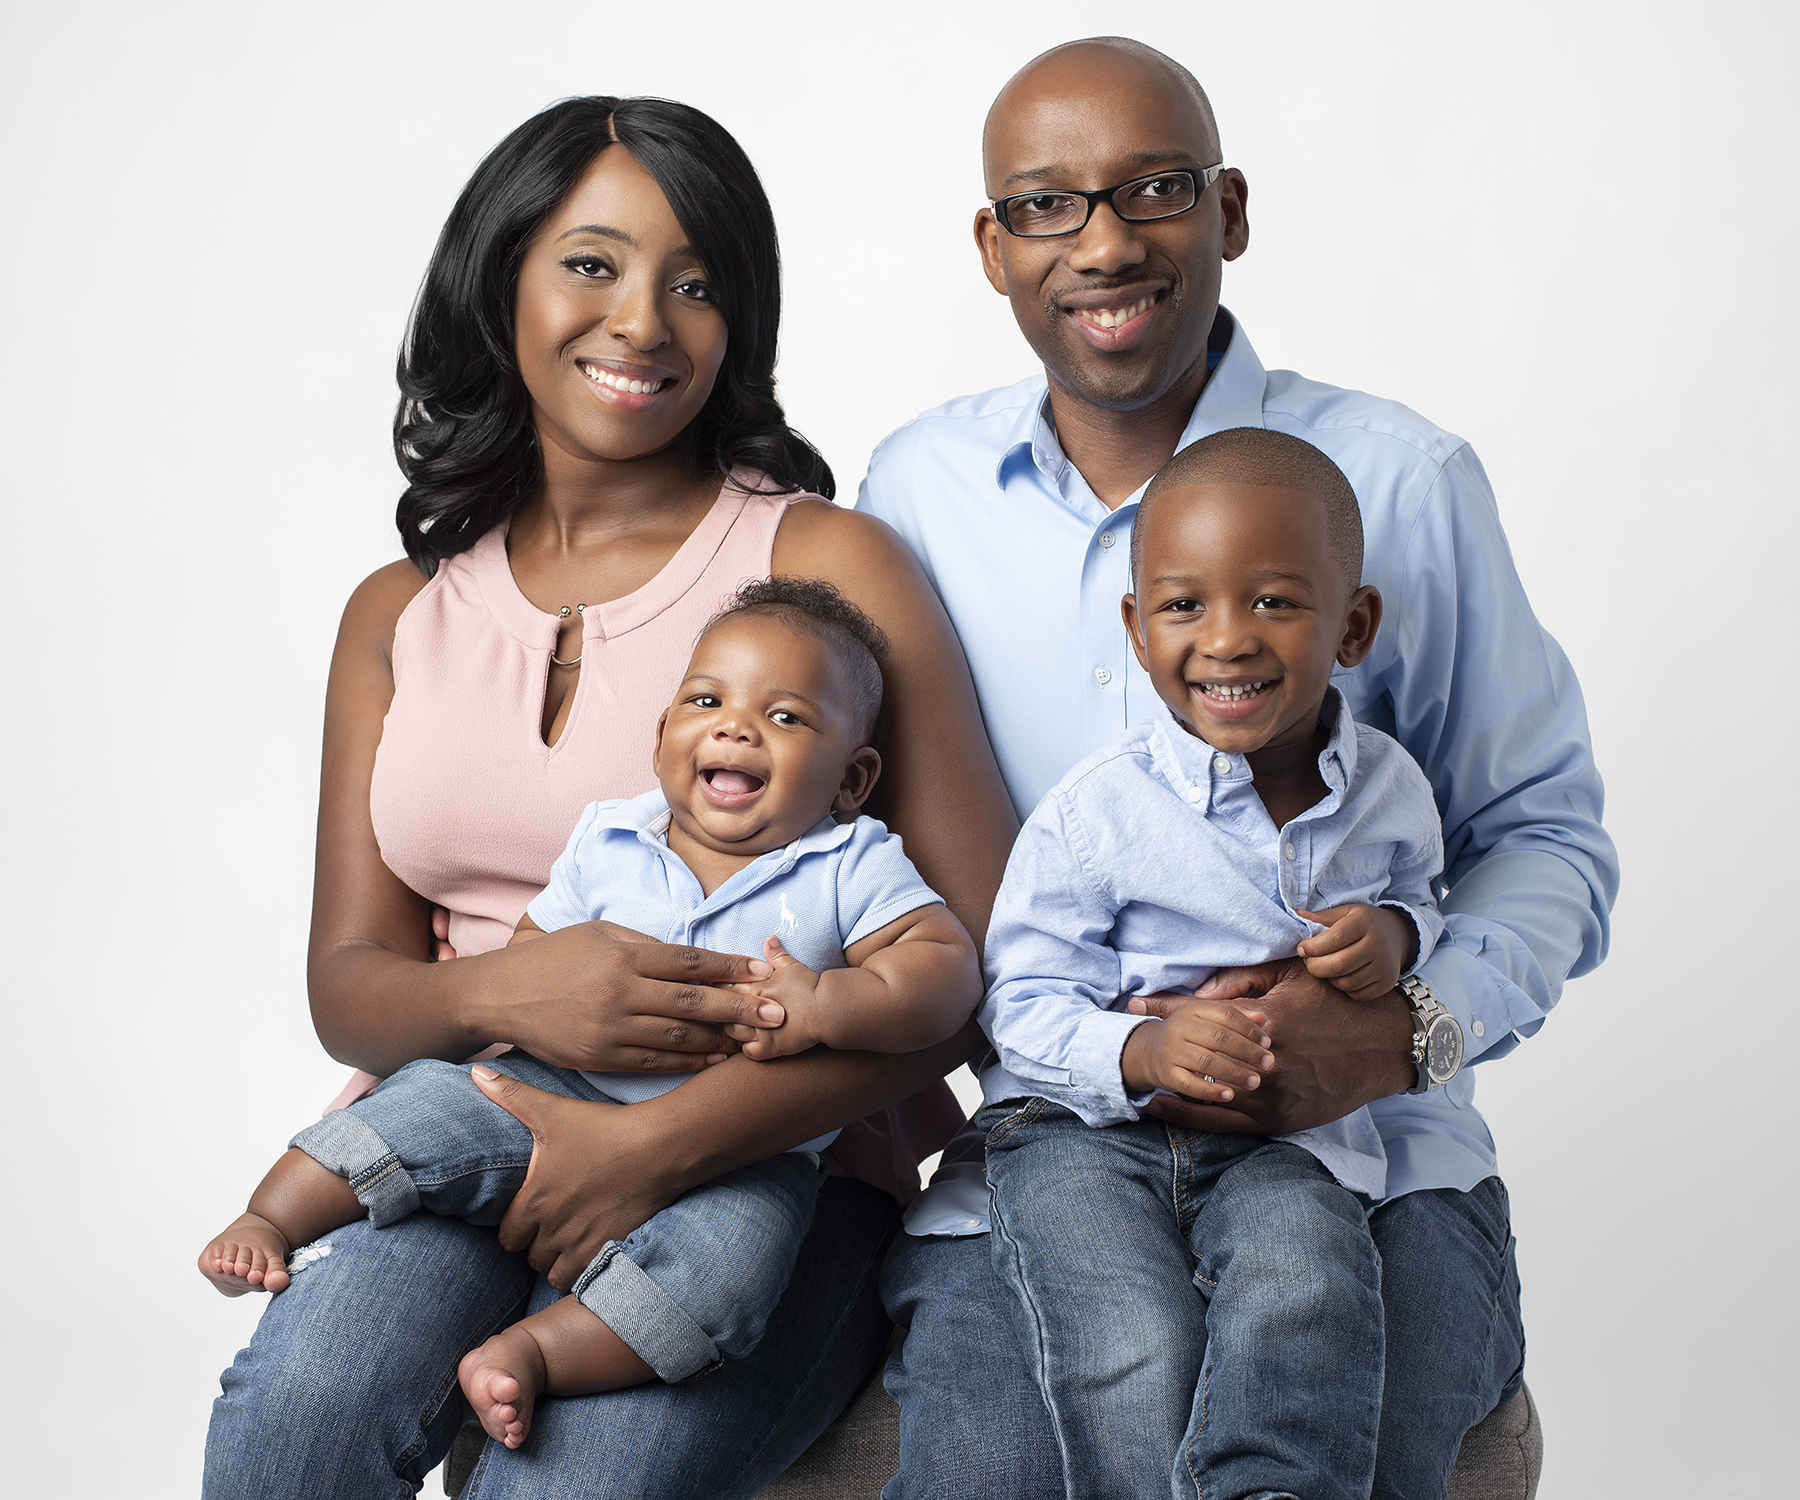 Why Family Portraits Boost a Child's Self-Esteem